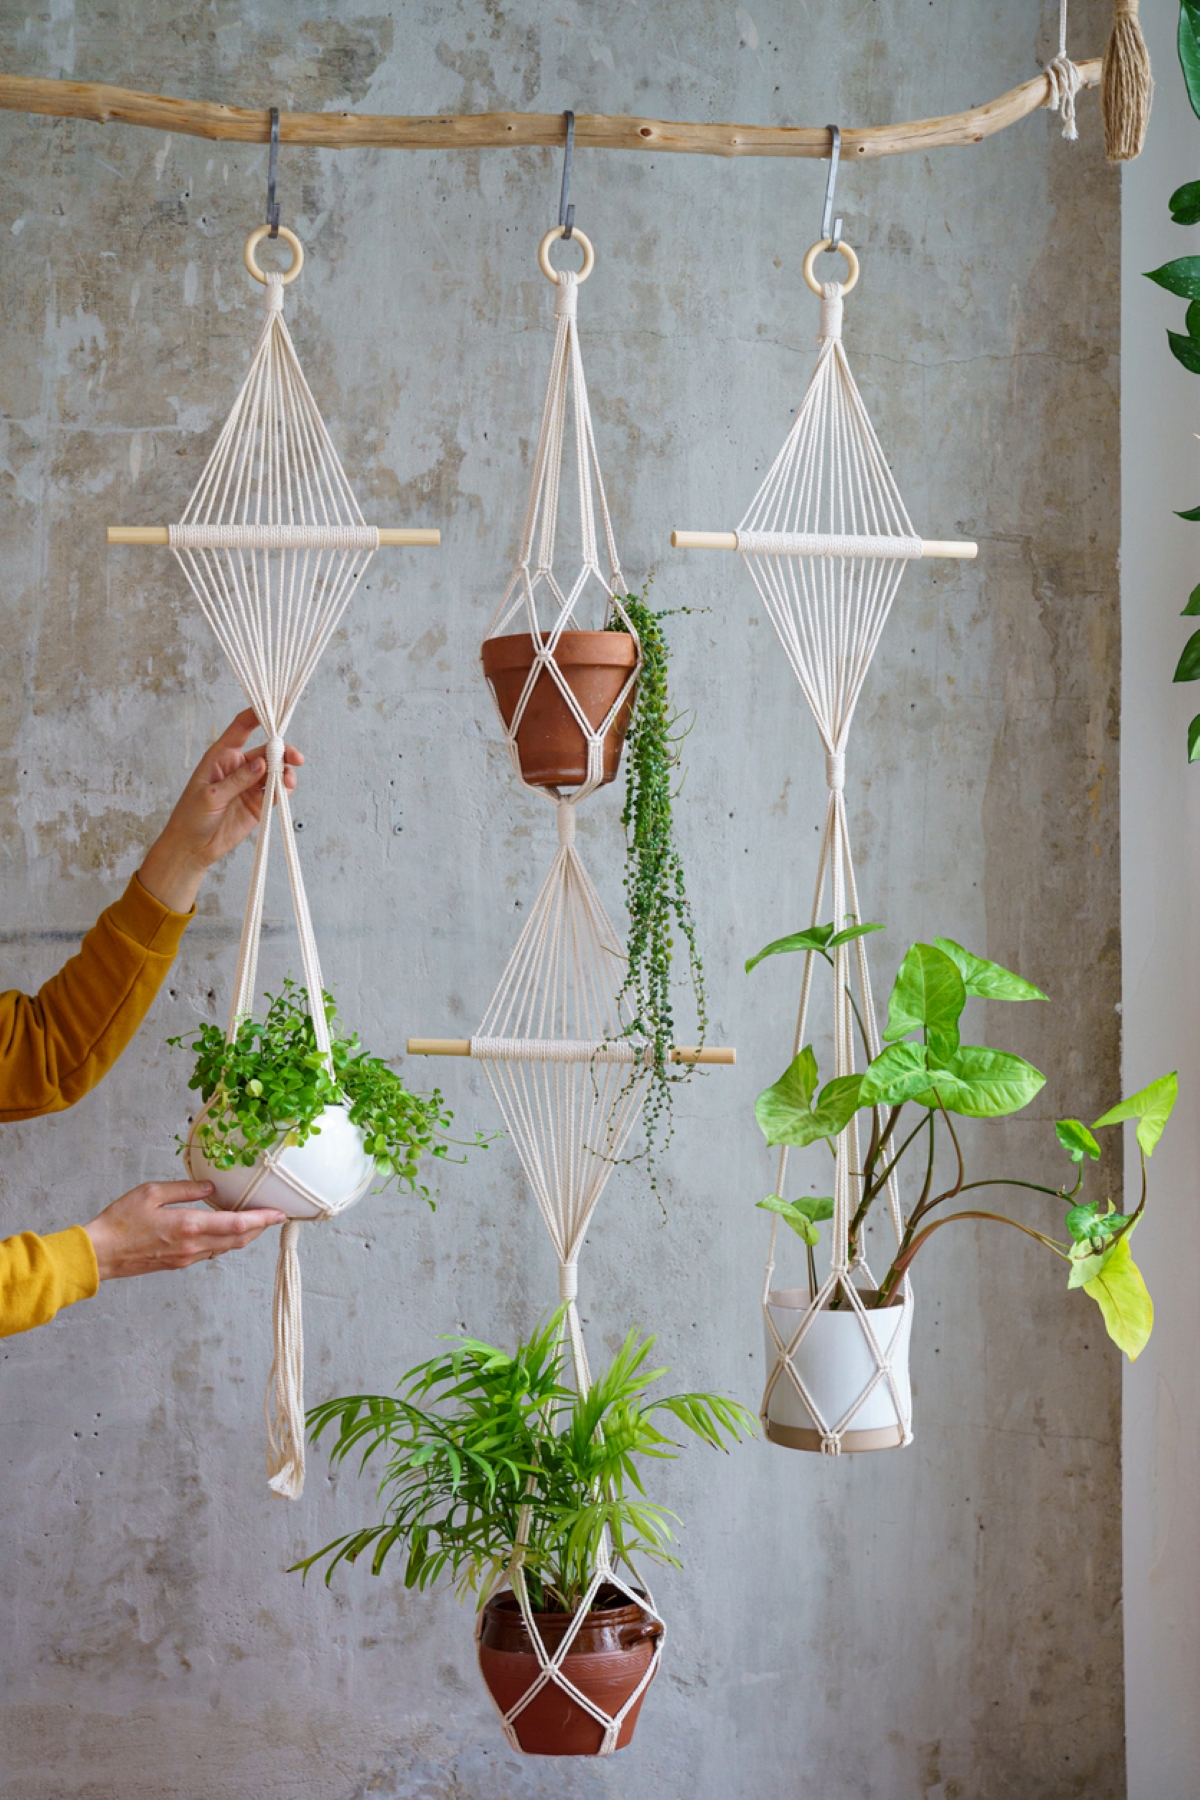 Person holding macrame plant holders